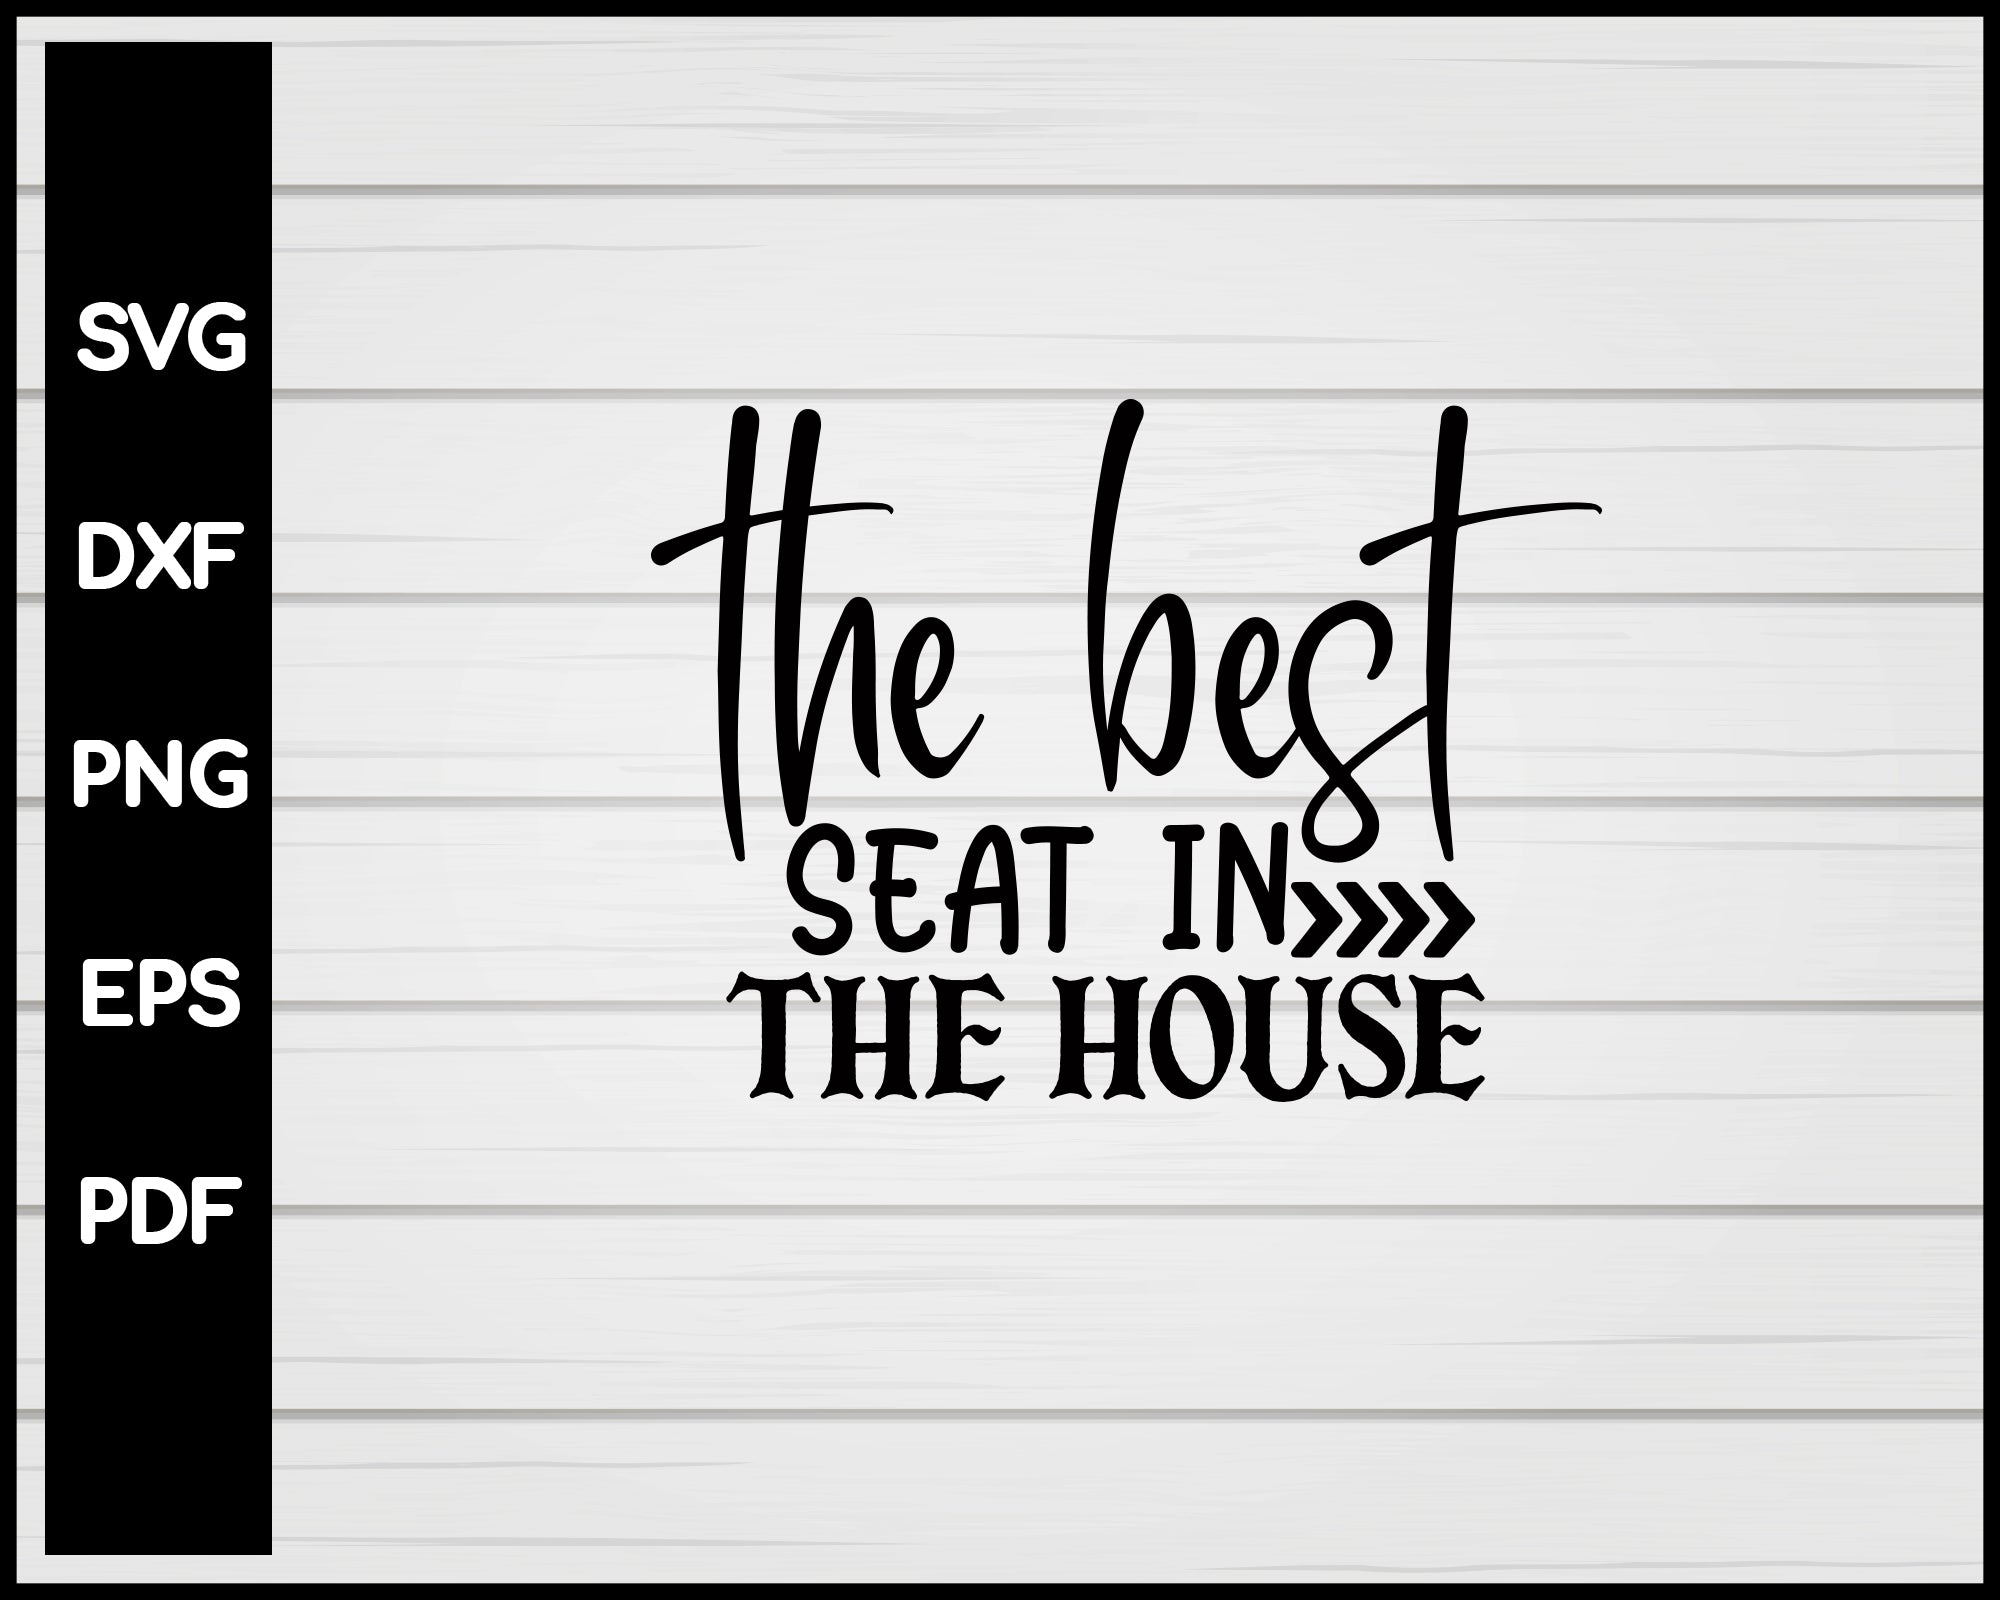 The Best Seat In The House svg Cut File For Cricut Silhouette eps png dxf Printable Files